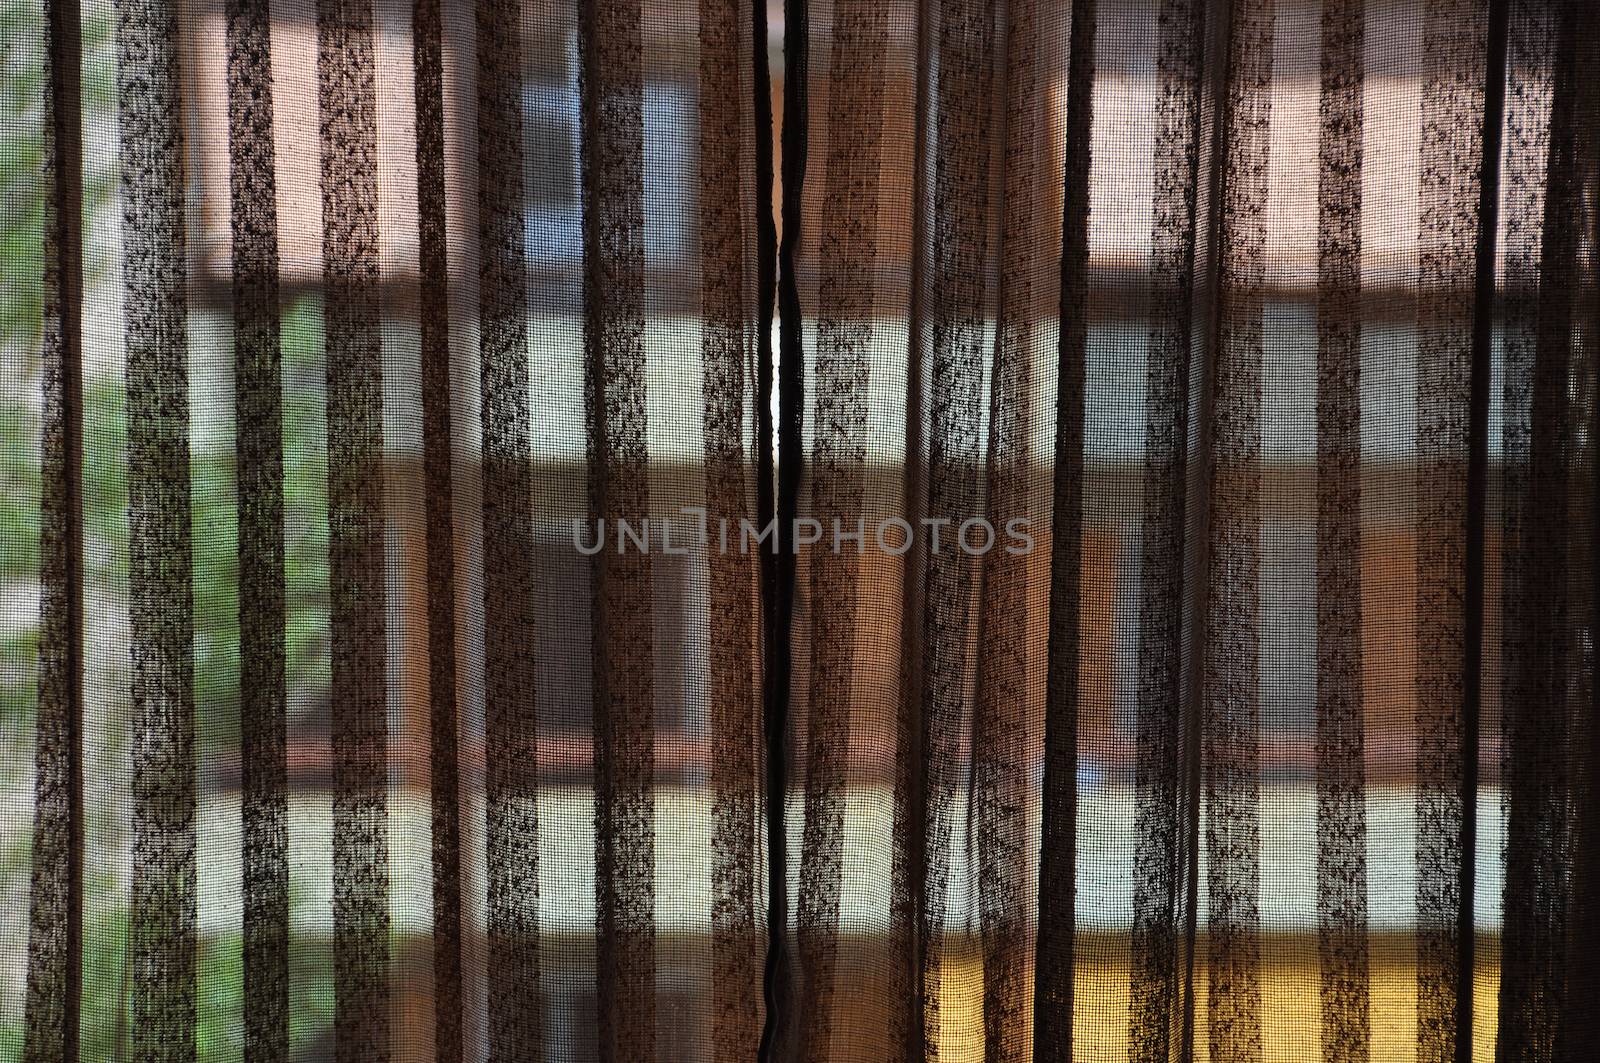 Brown transparent curtains and distorted colorful building in the background.